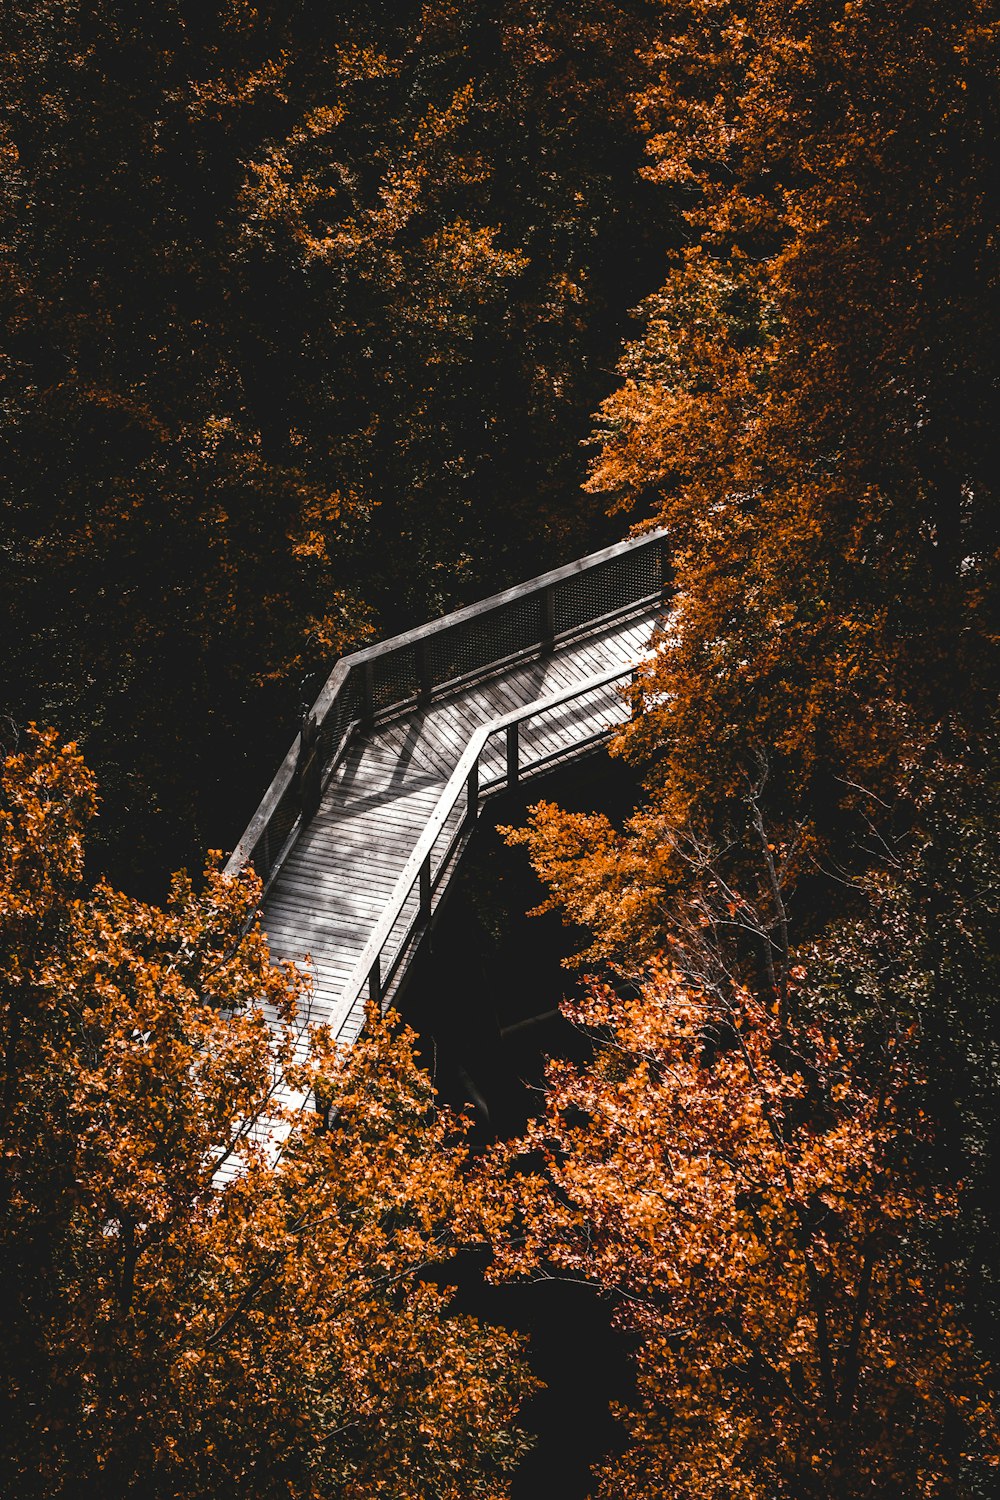 a wooden bridge surrounded by lots of trees